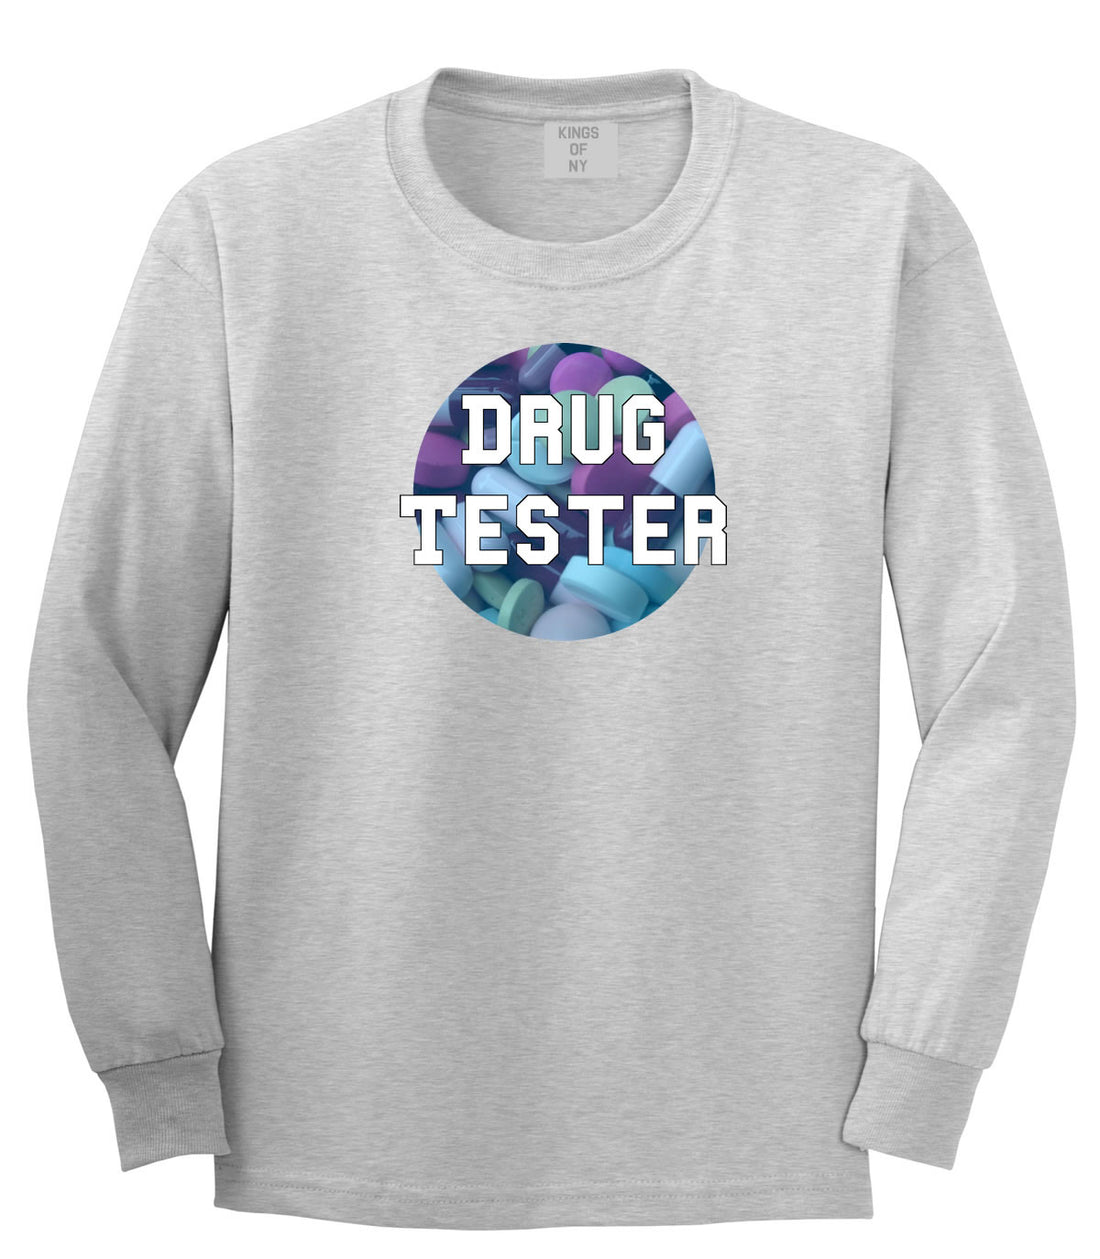 Drug tester weed smoking funny college Long Sleeve T-Shirt In Grey by Kings Of NY